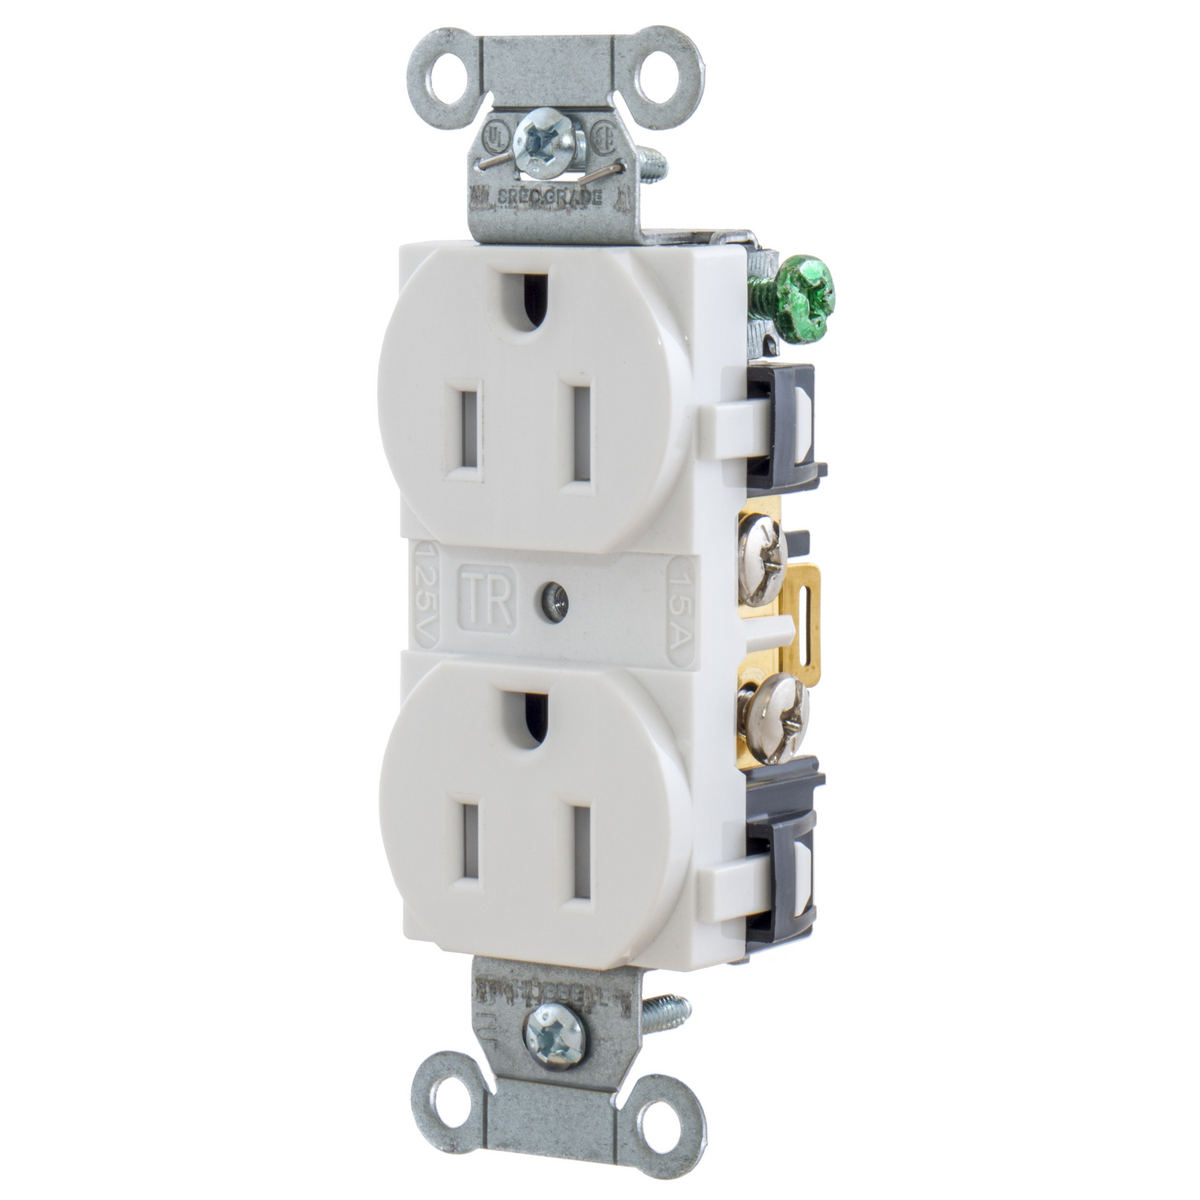 Pack of 10 Hubbell CR20 BROWN Duplex Receptacle 20A 5-20R 125V 